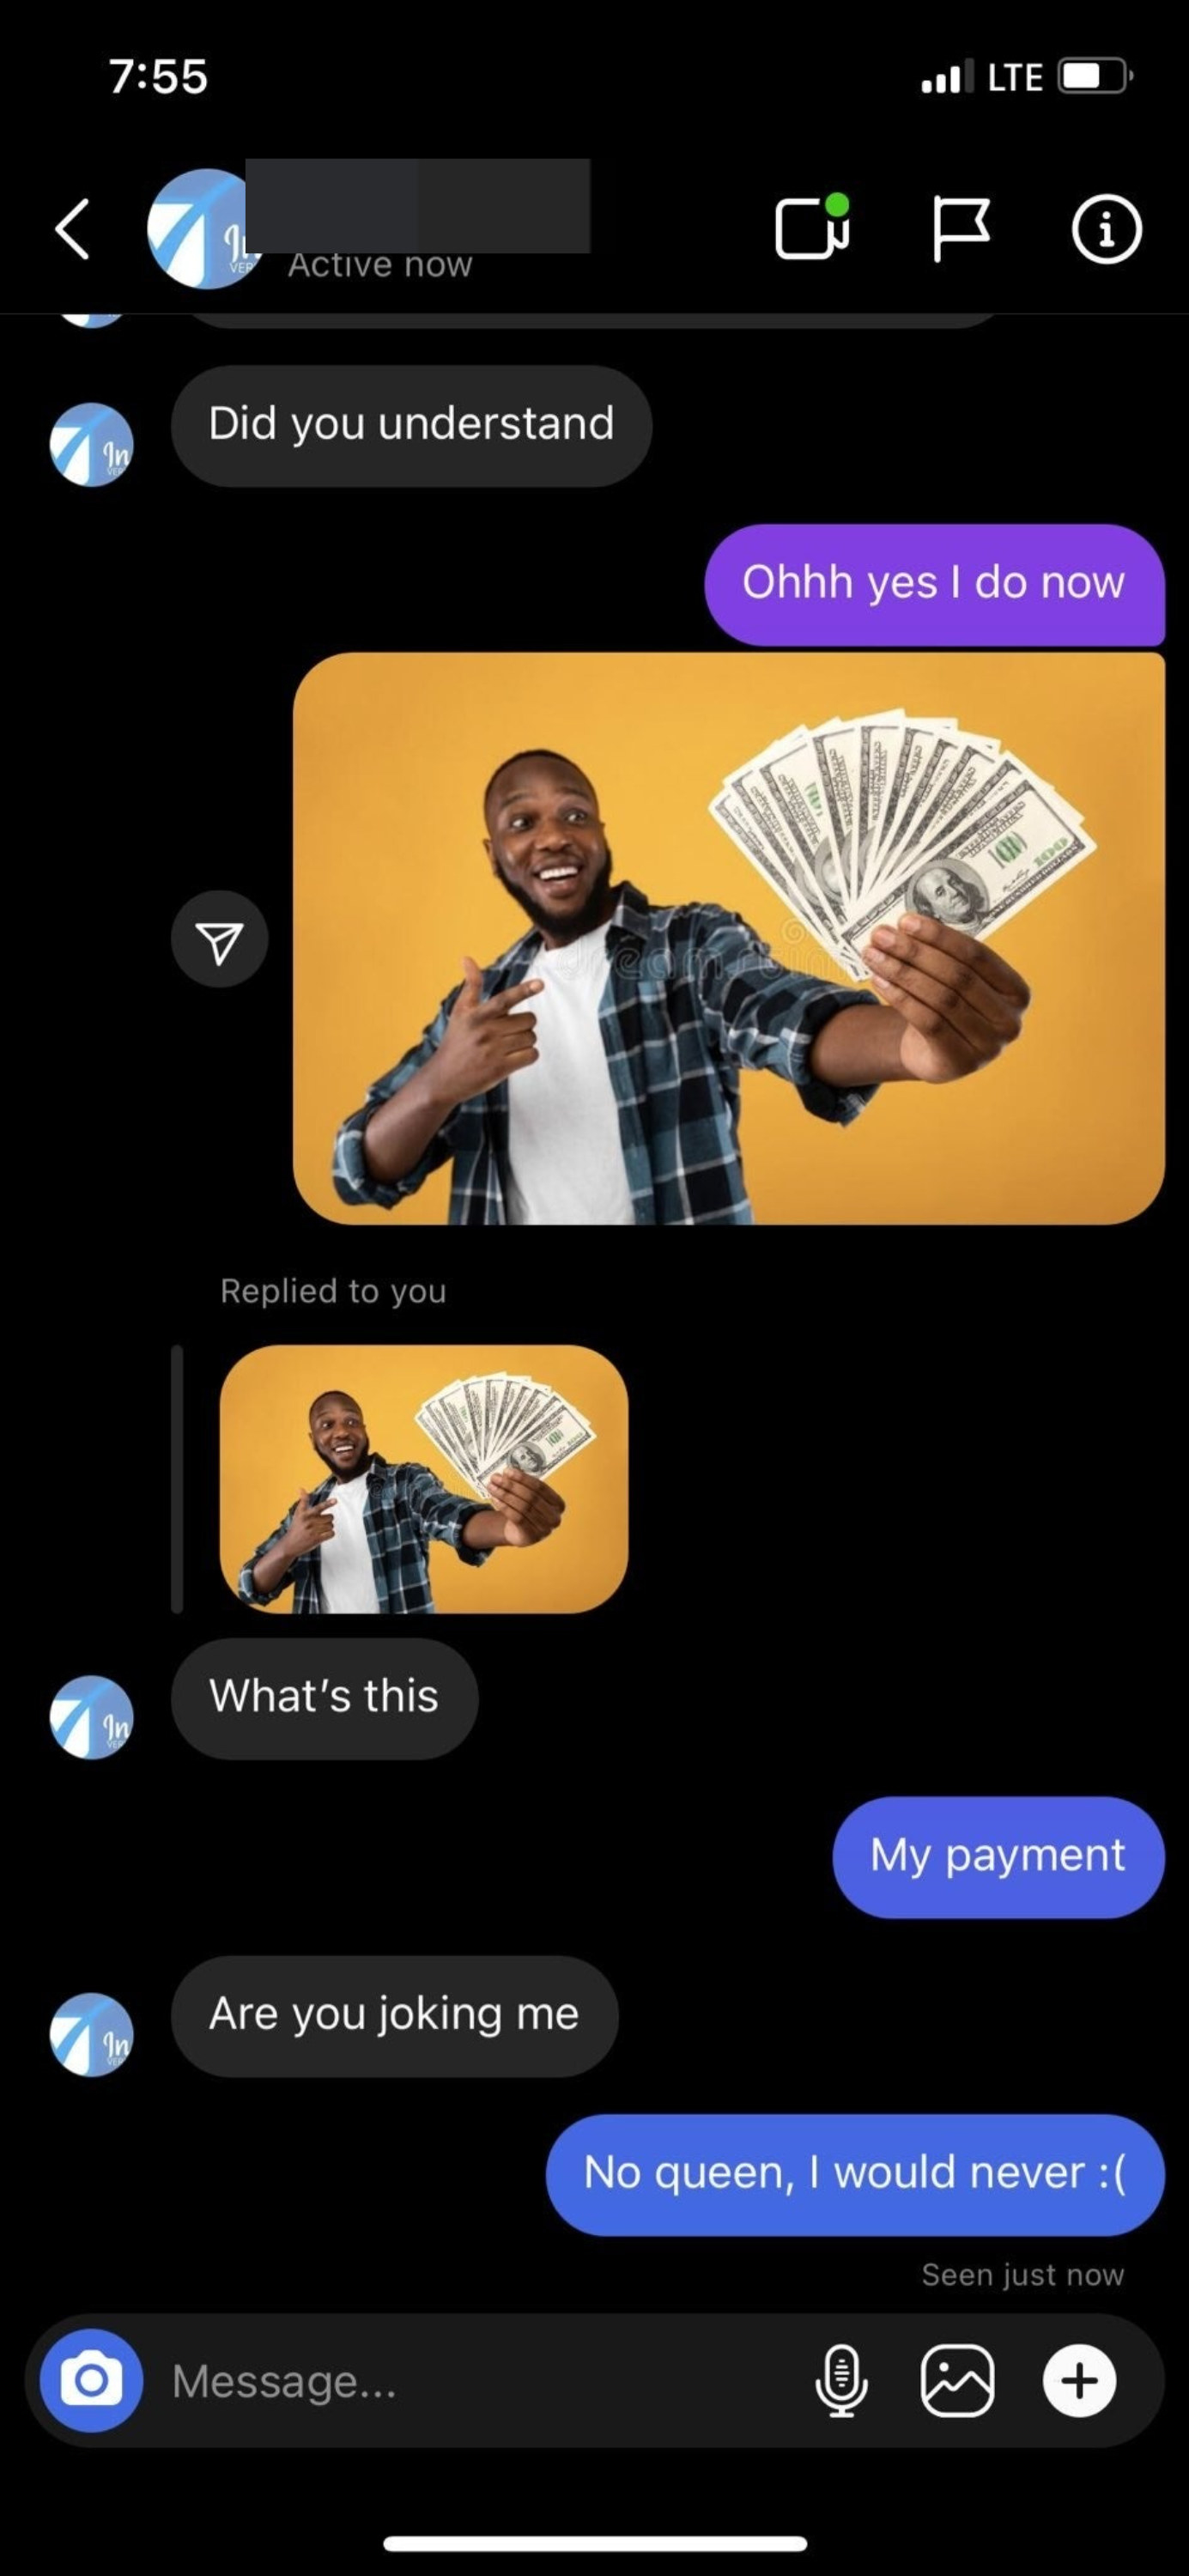 person who sent a stock photo of a man holding money instead of payment